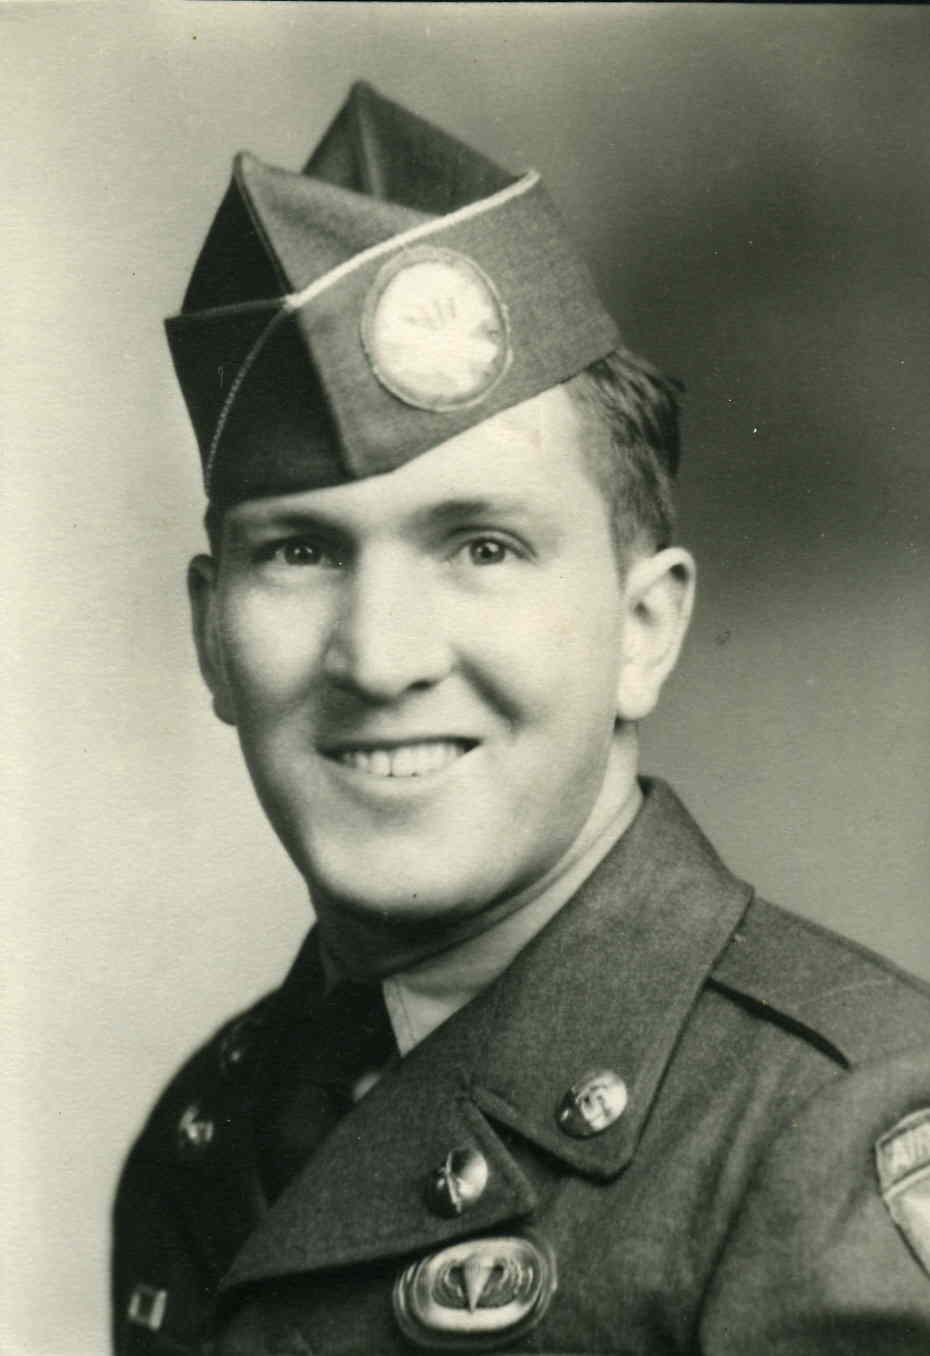 A portrait of Luther Korns in uniform.